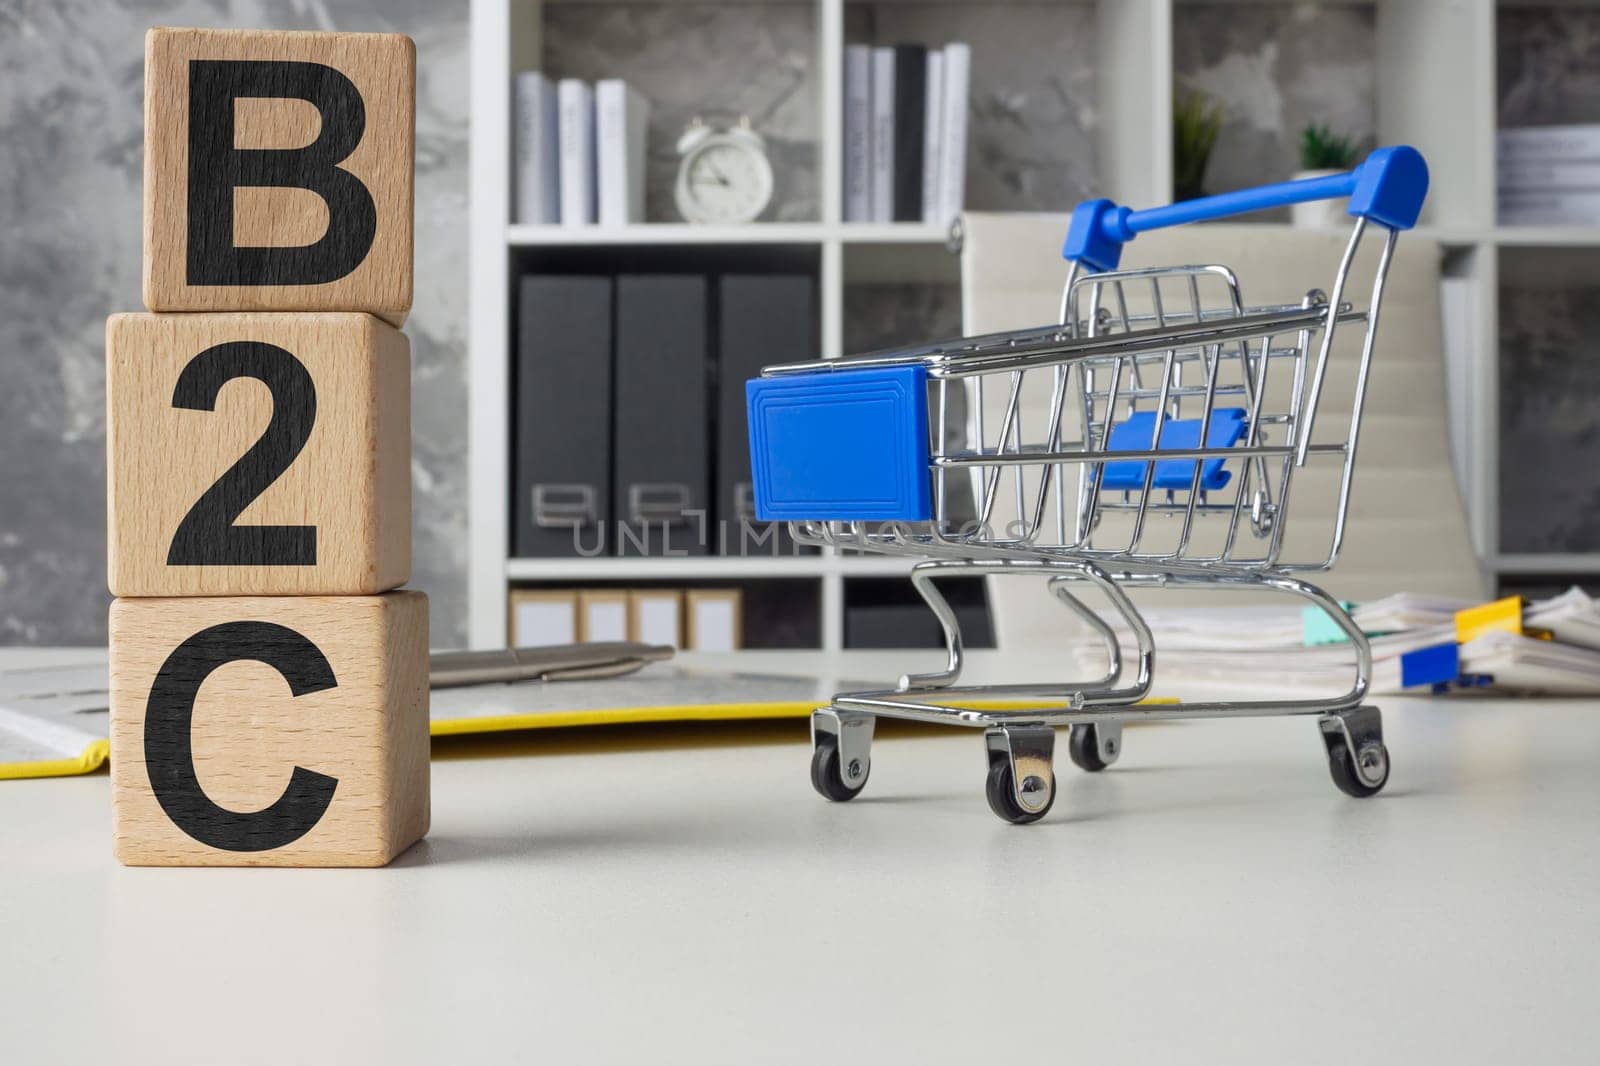 Cubes B2C Business to Consumer and a shopping cart.